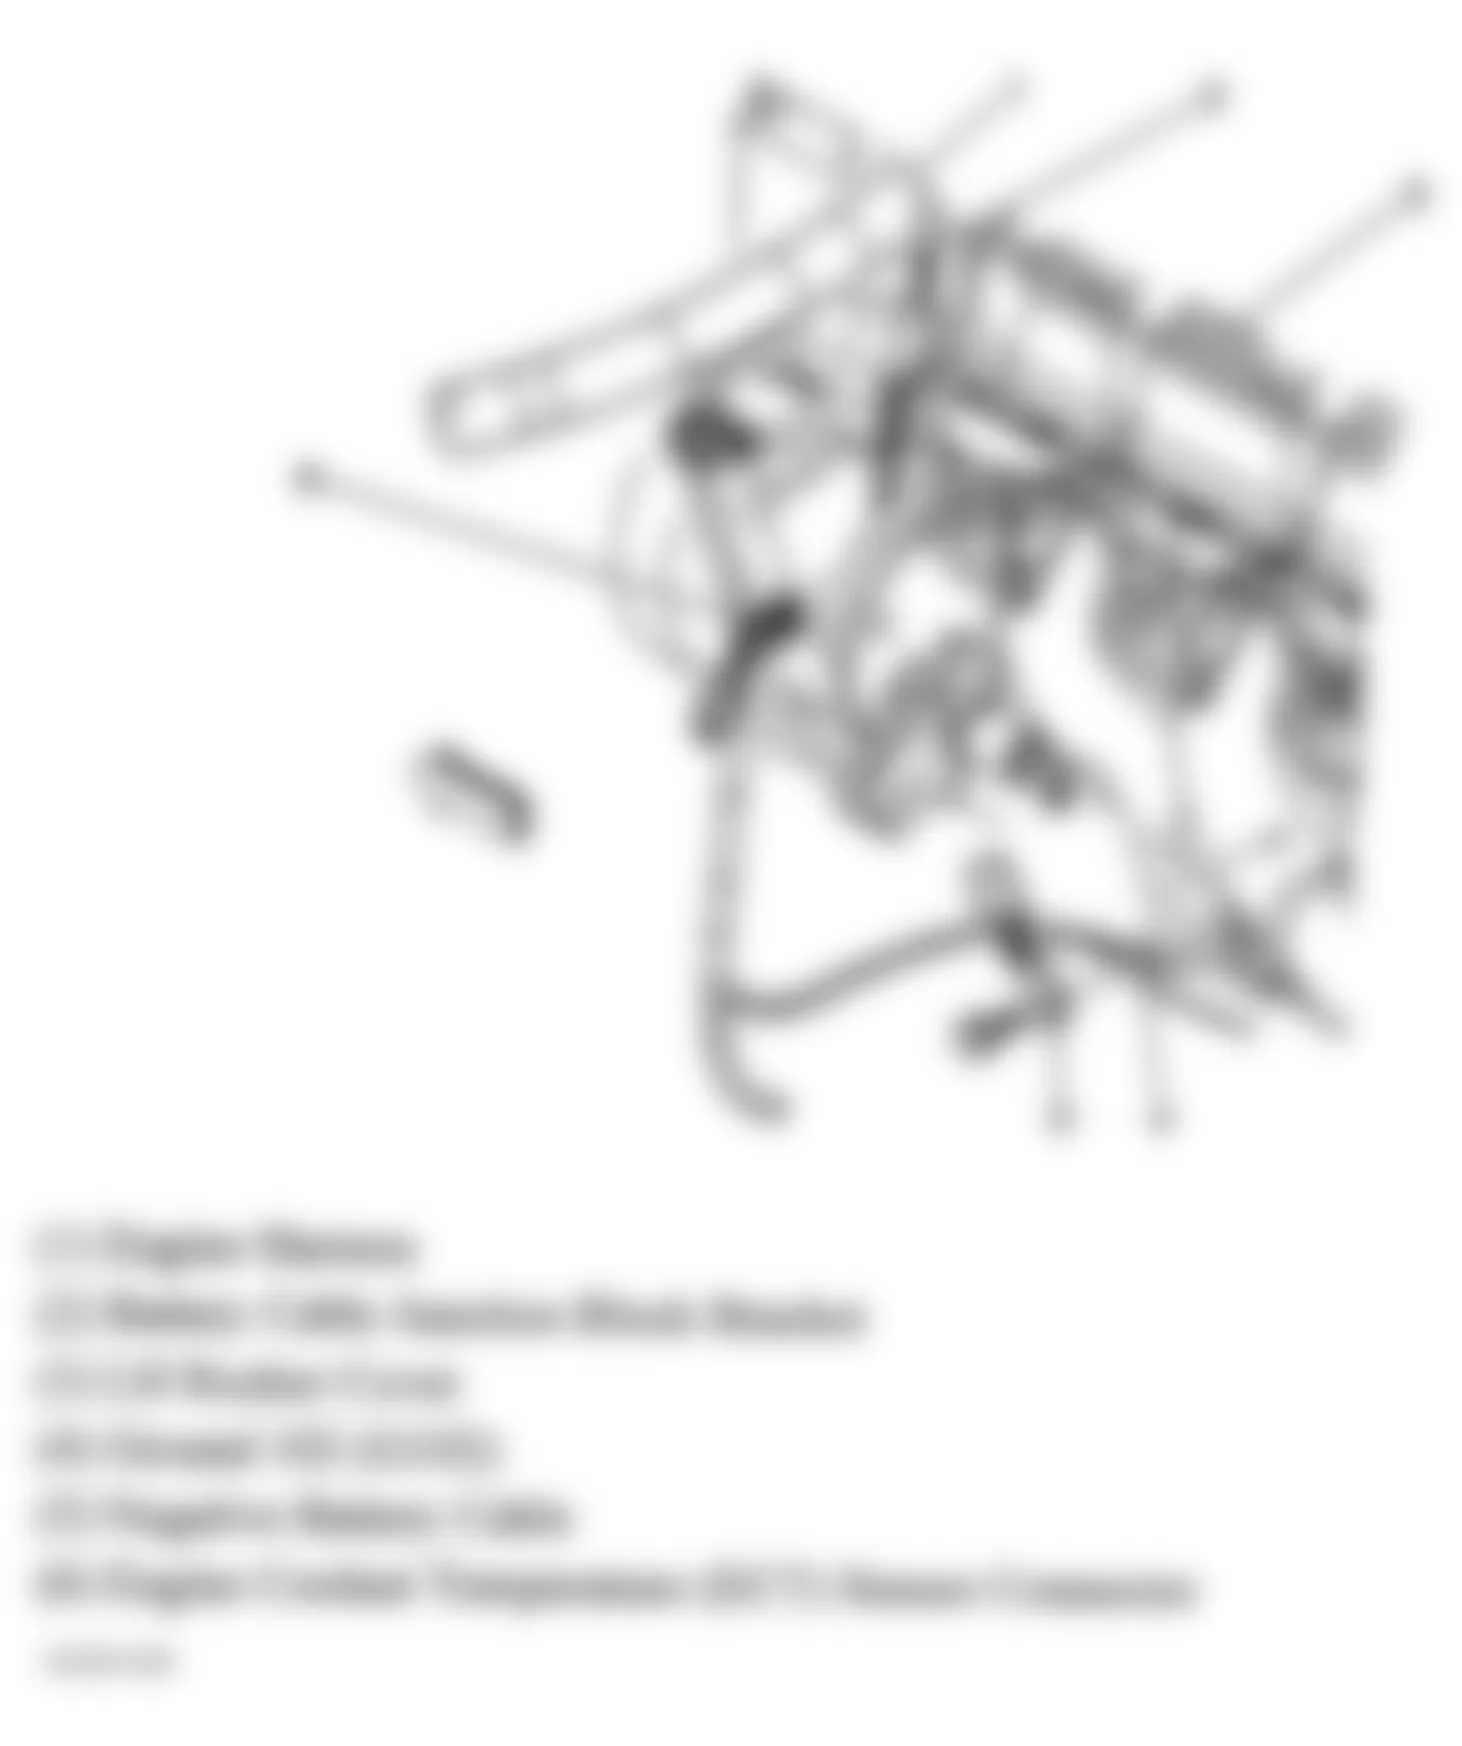 Chevrolet Avalanche 1500 2006 - Component Locations -  Lower Left Rear Of Engine (4.8L, 5.3L & 6.0L)